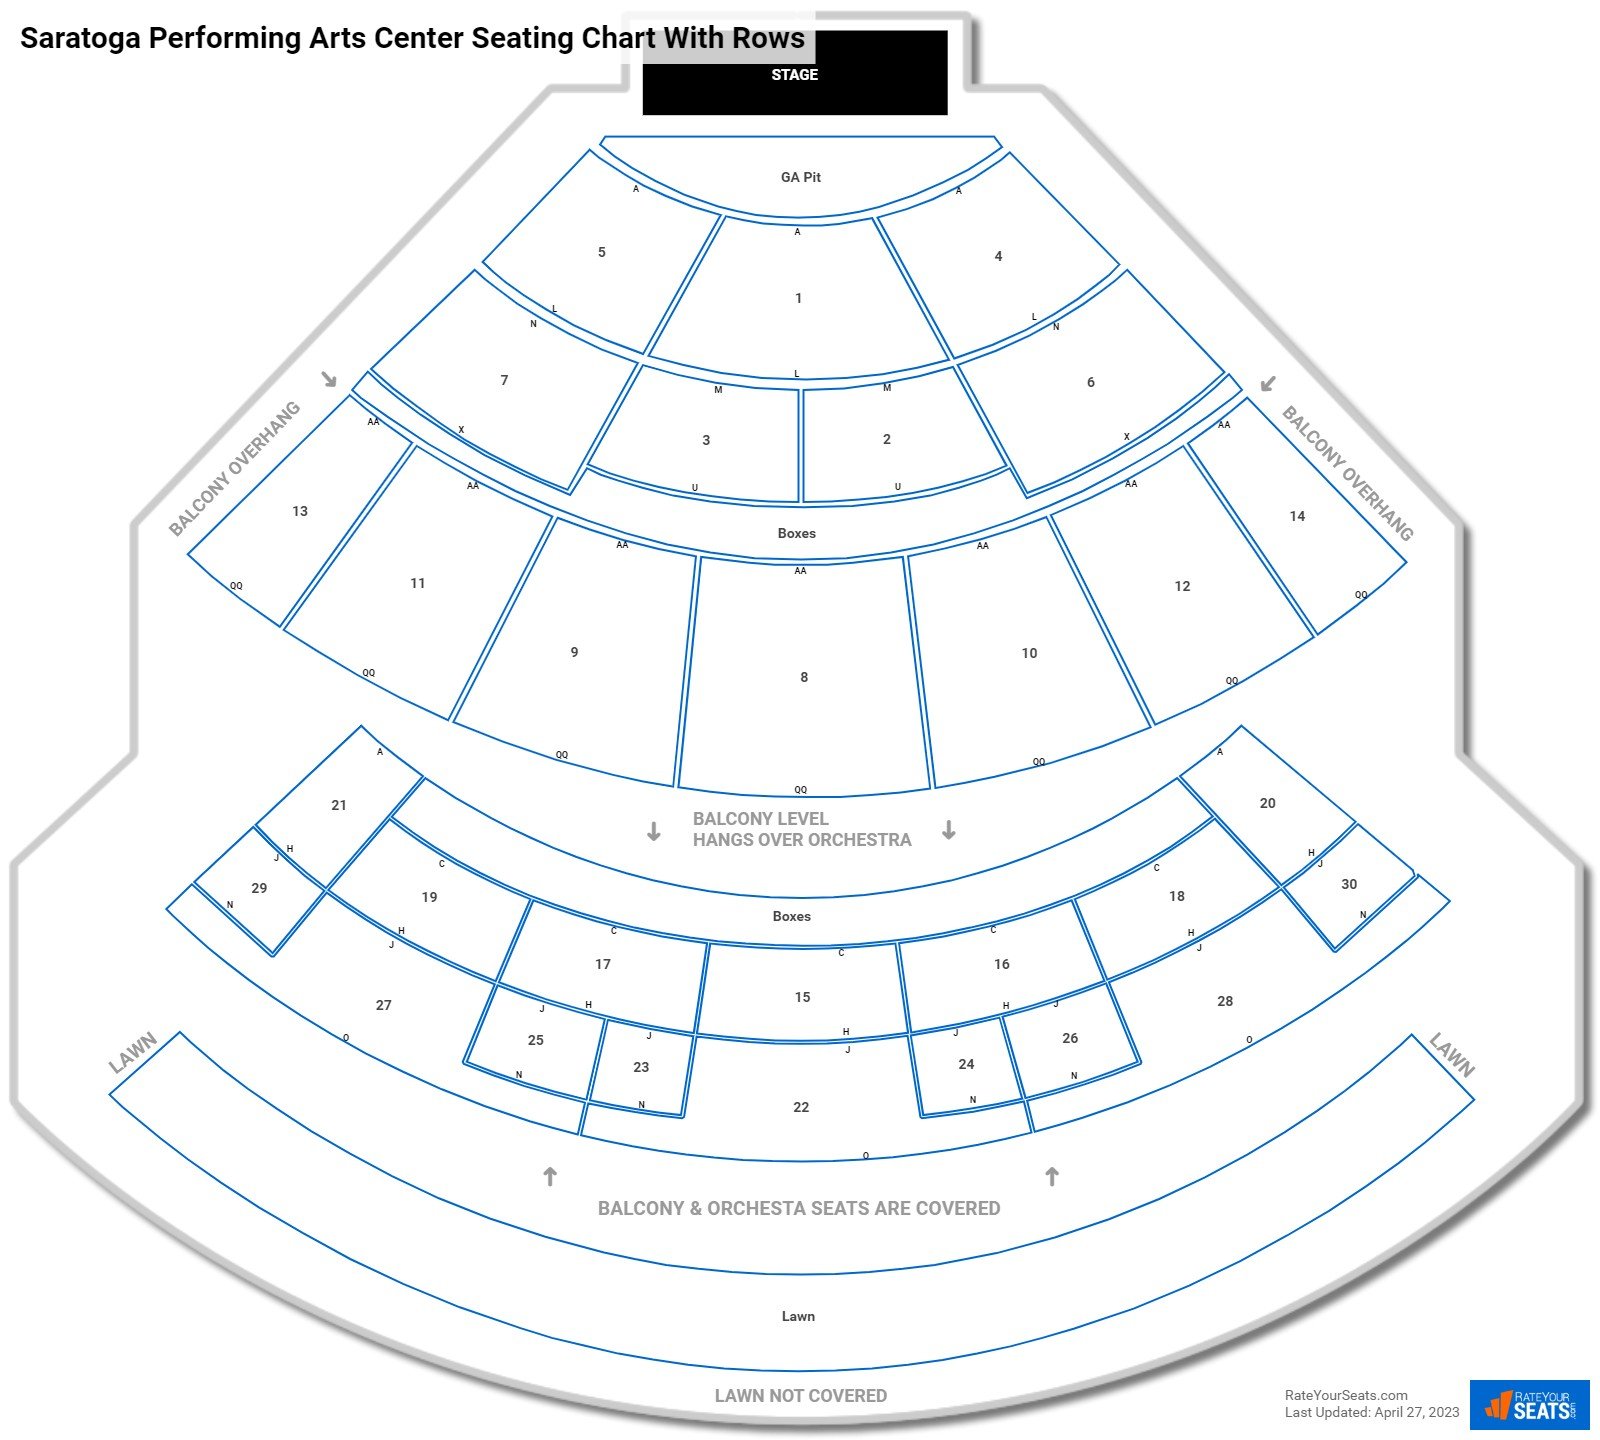 Saratoga Performing Arts Center seating chart with row numbers